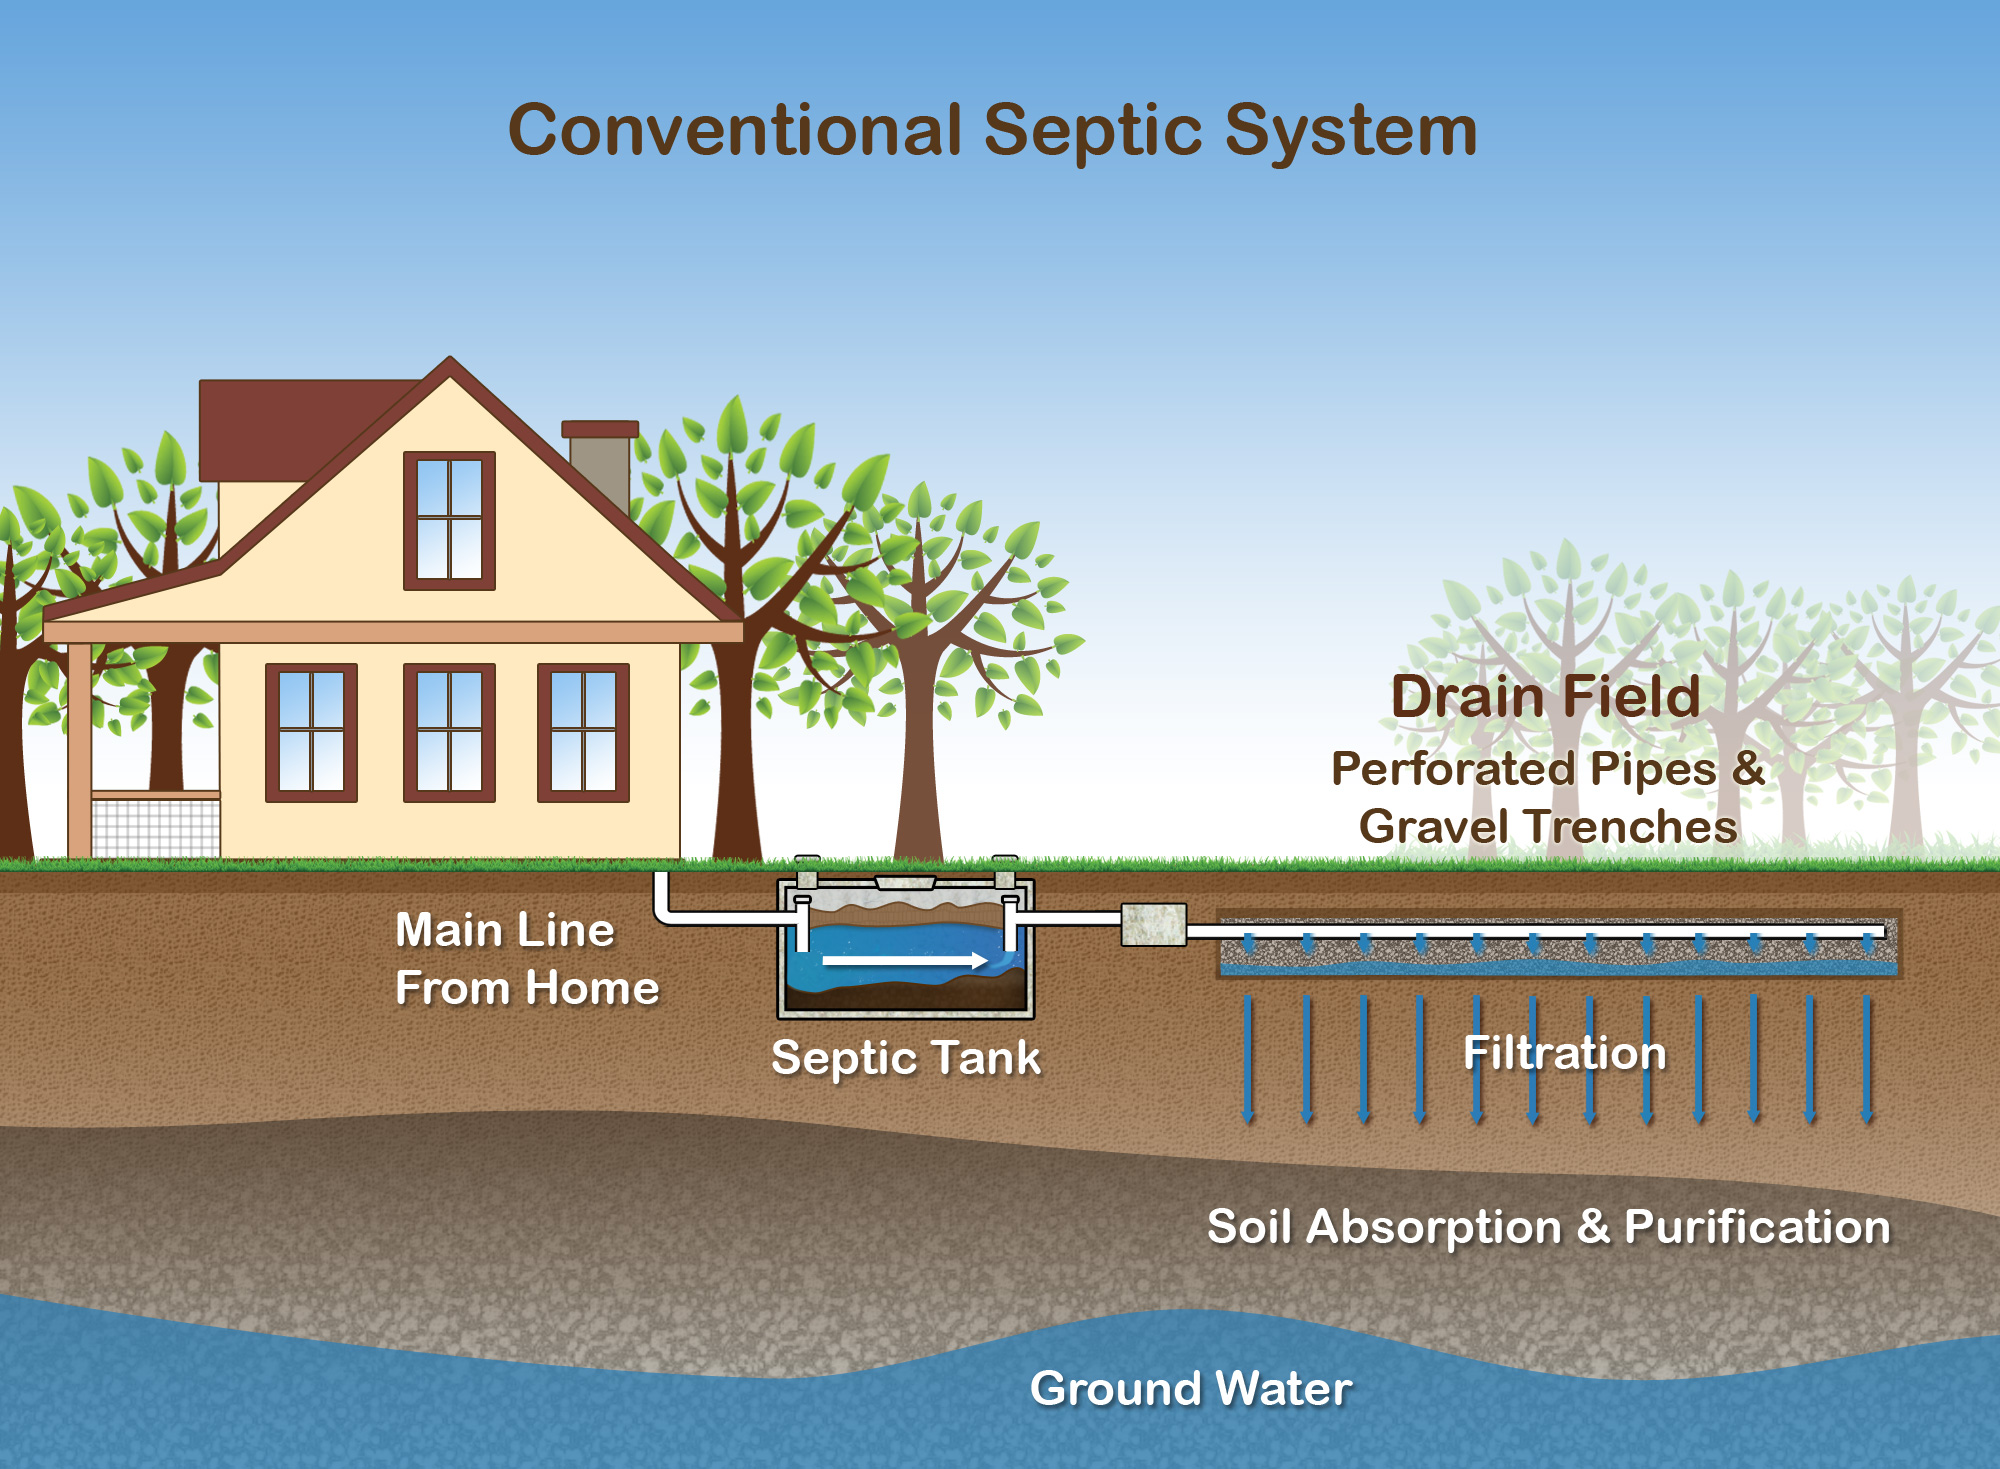 Keep your septic system healthy | Minnesota Pollution Control Agency